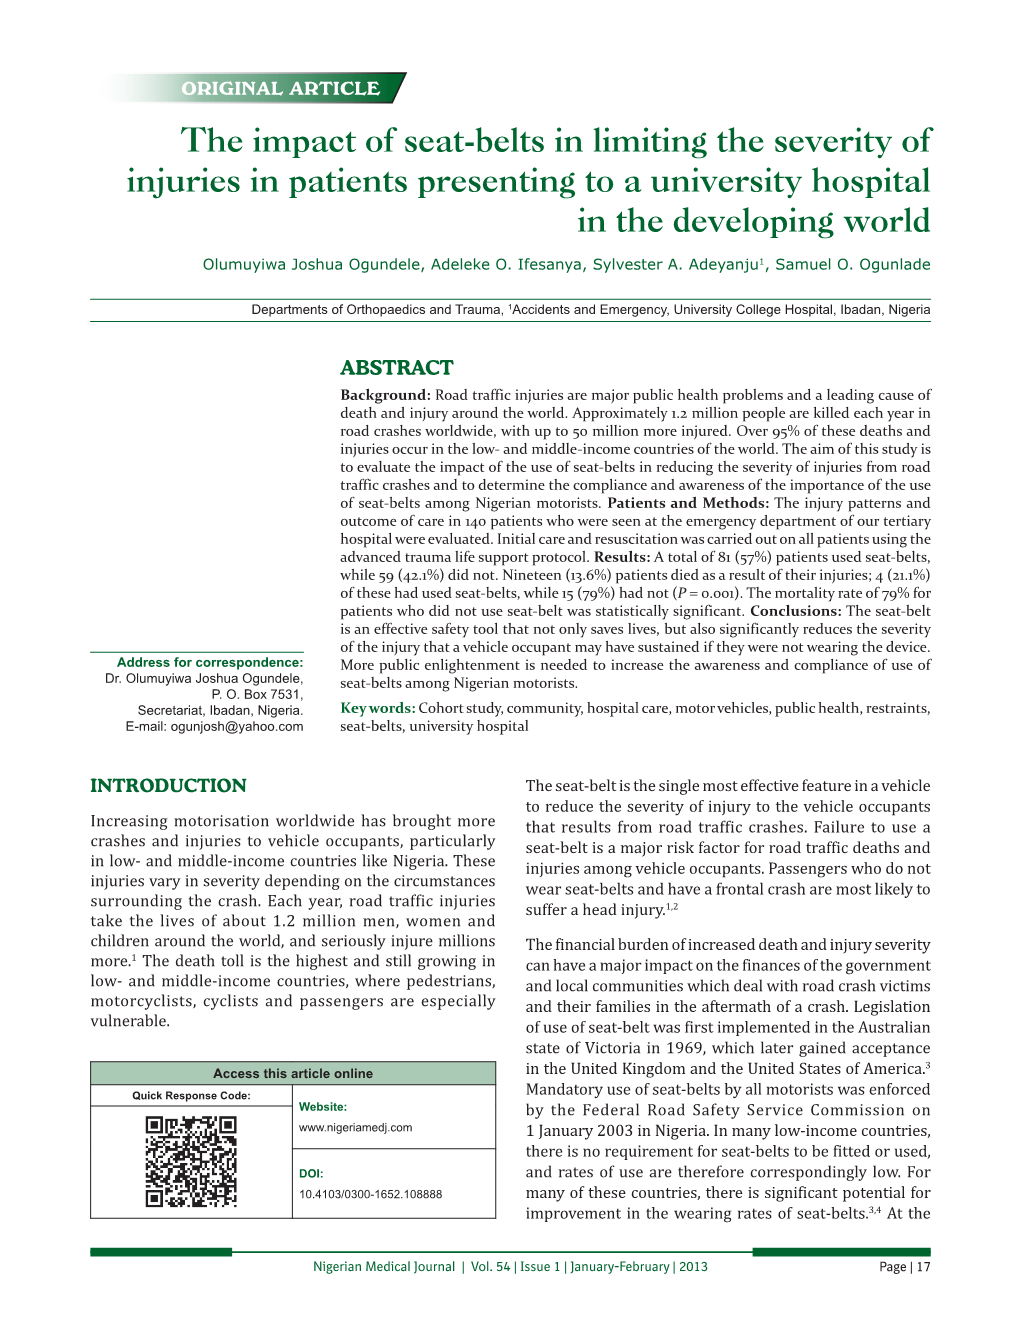 The Impact of Seat‑Belts in Limiting the Severity of Injuries in Patients Presenting to a University Hospital in the Developing World